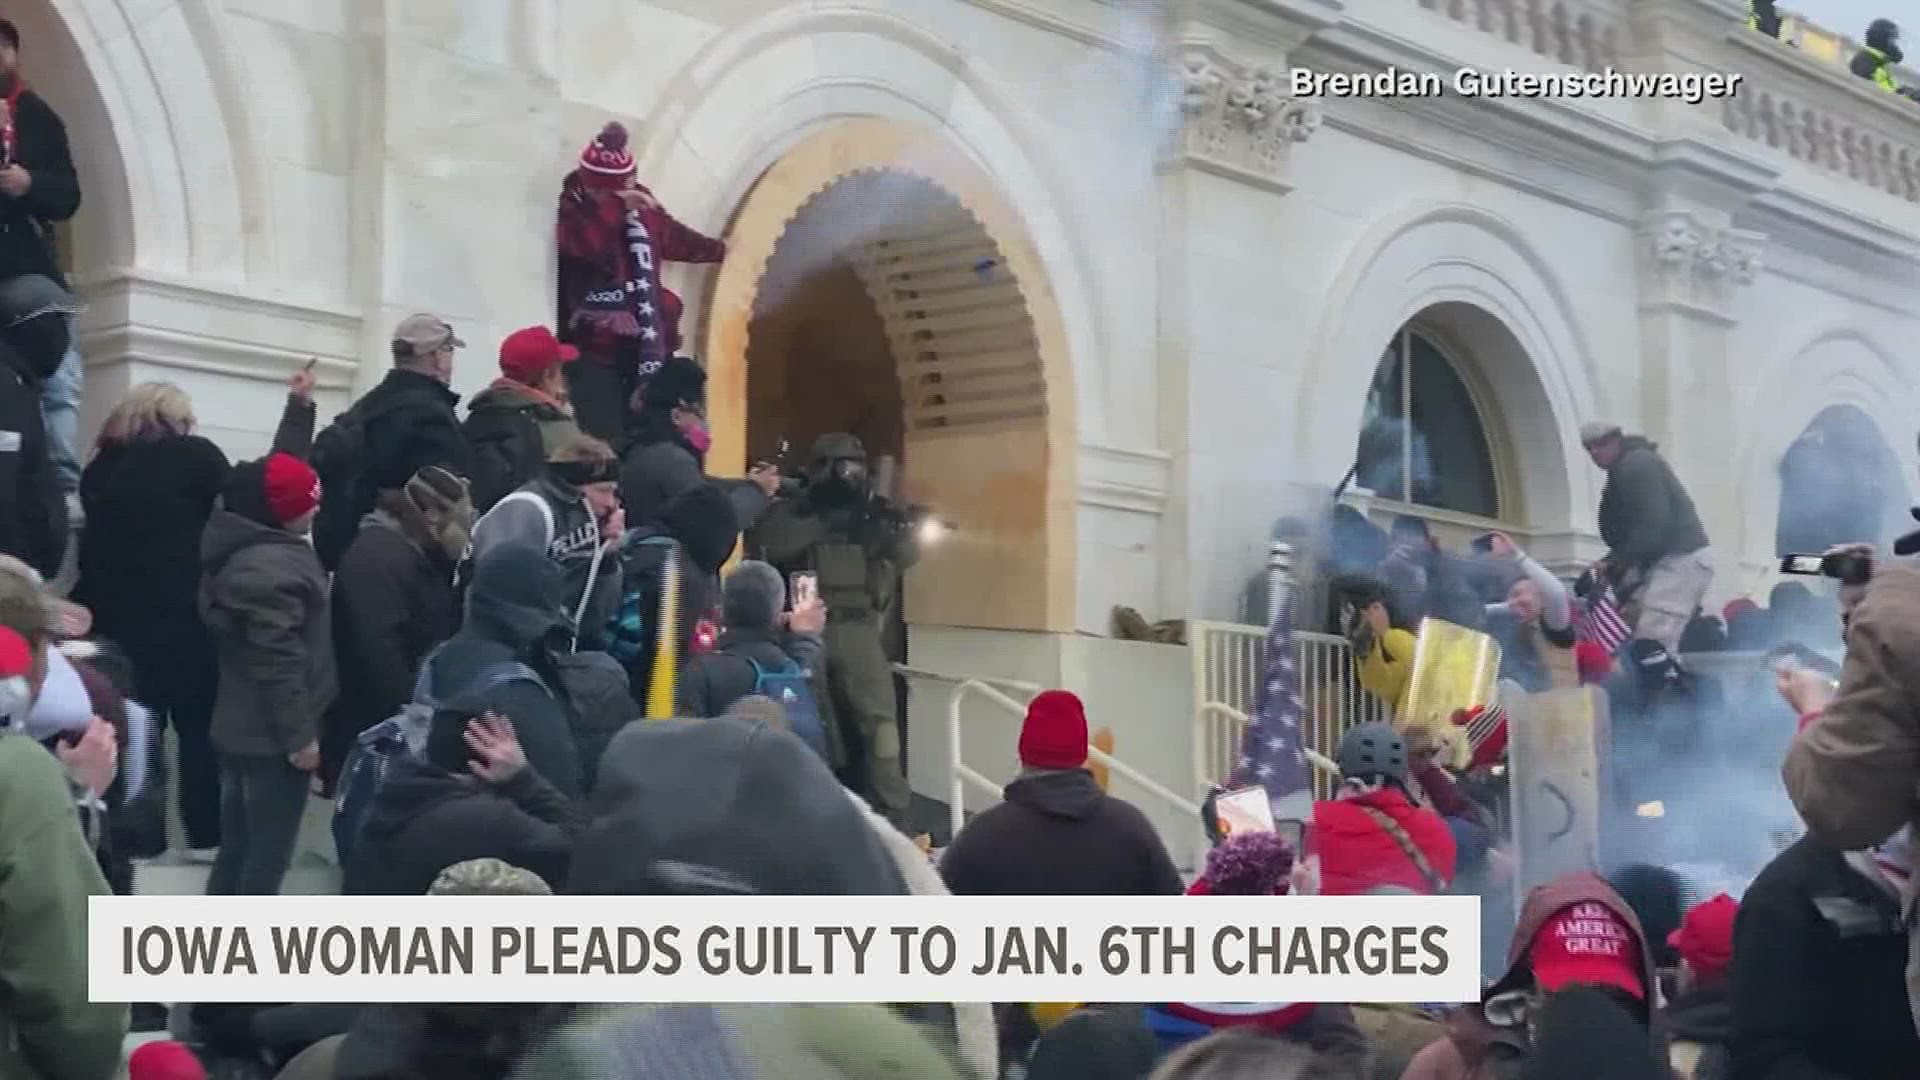 Deborah Sandoval, of Des Moines, was scheduled to stand trial Wednesday in Washington, D.C., but instead pleaded guilty to the charge of entering the Capitol.